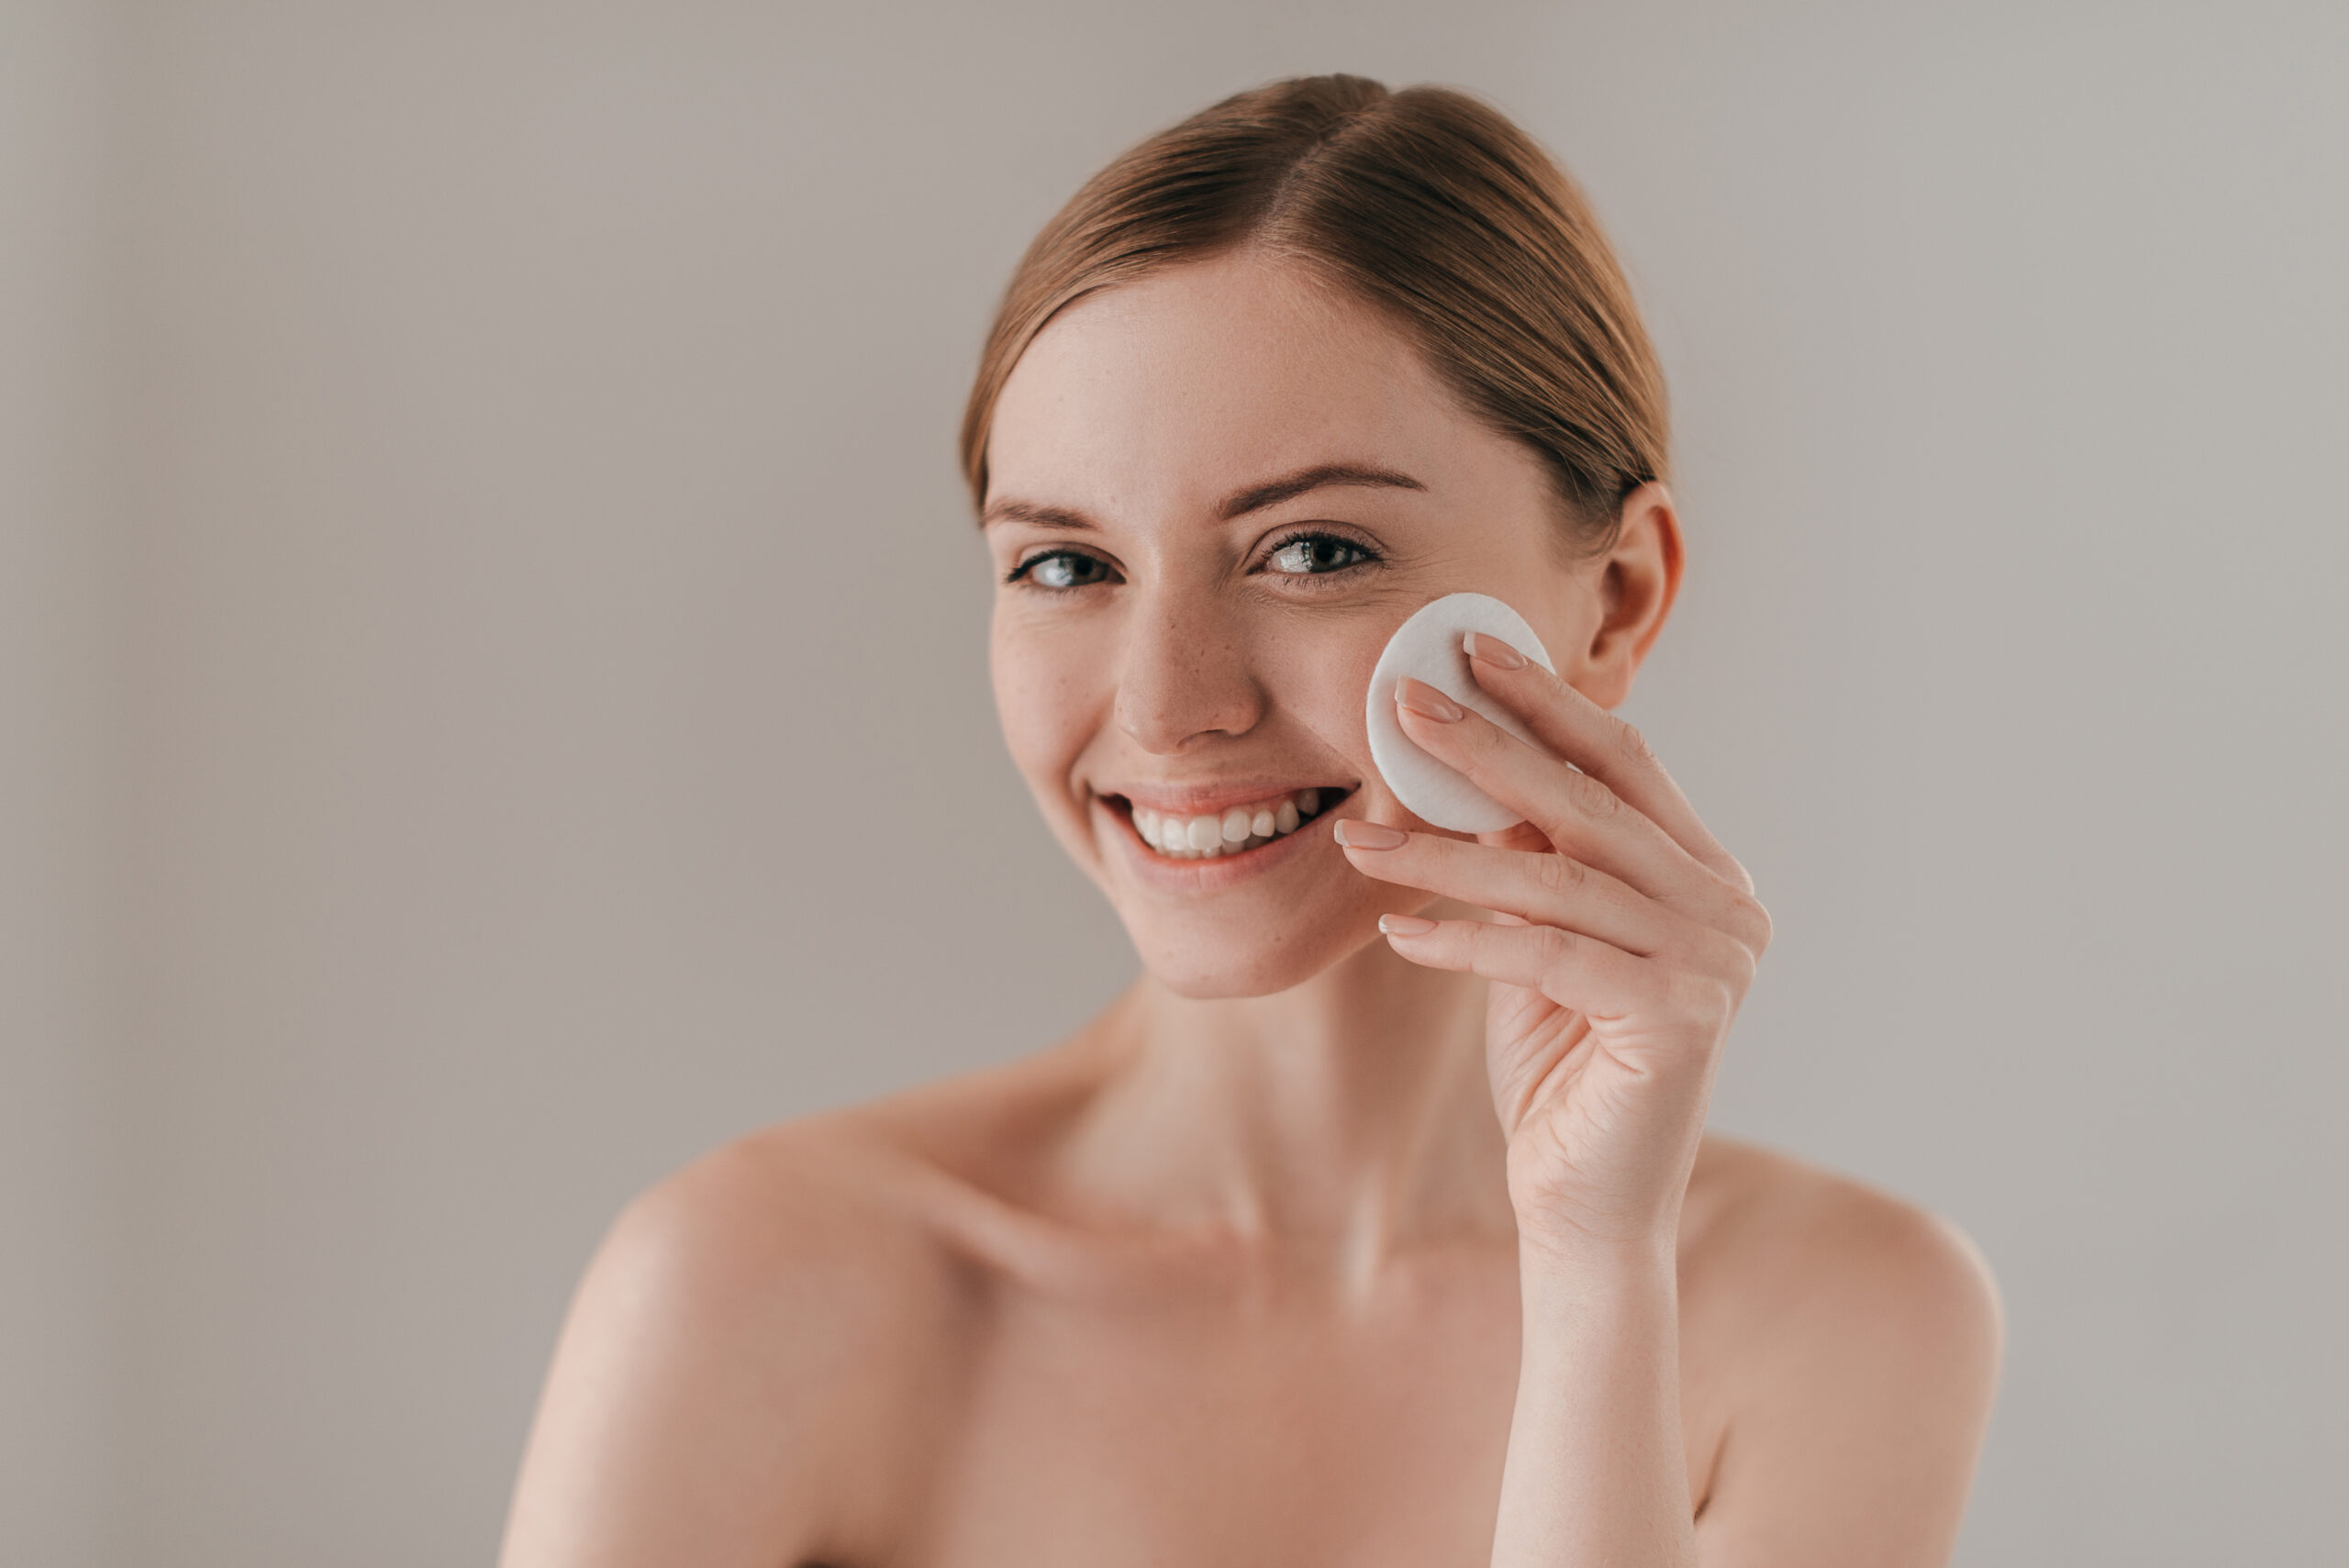 Time for skin care. Studio portrait of attractive woman cleansing her skin with a cotton pad while standing against background